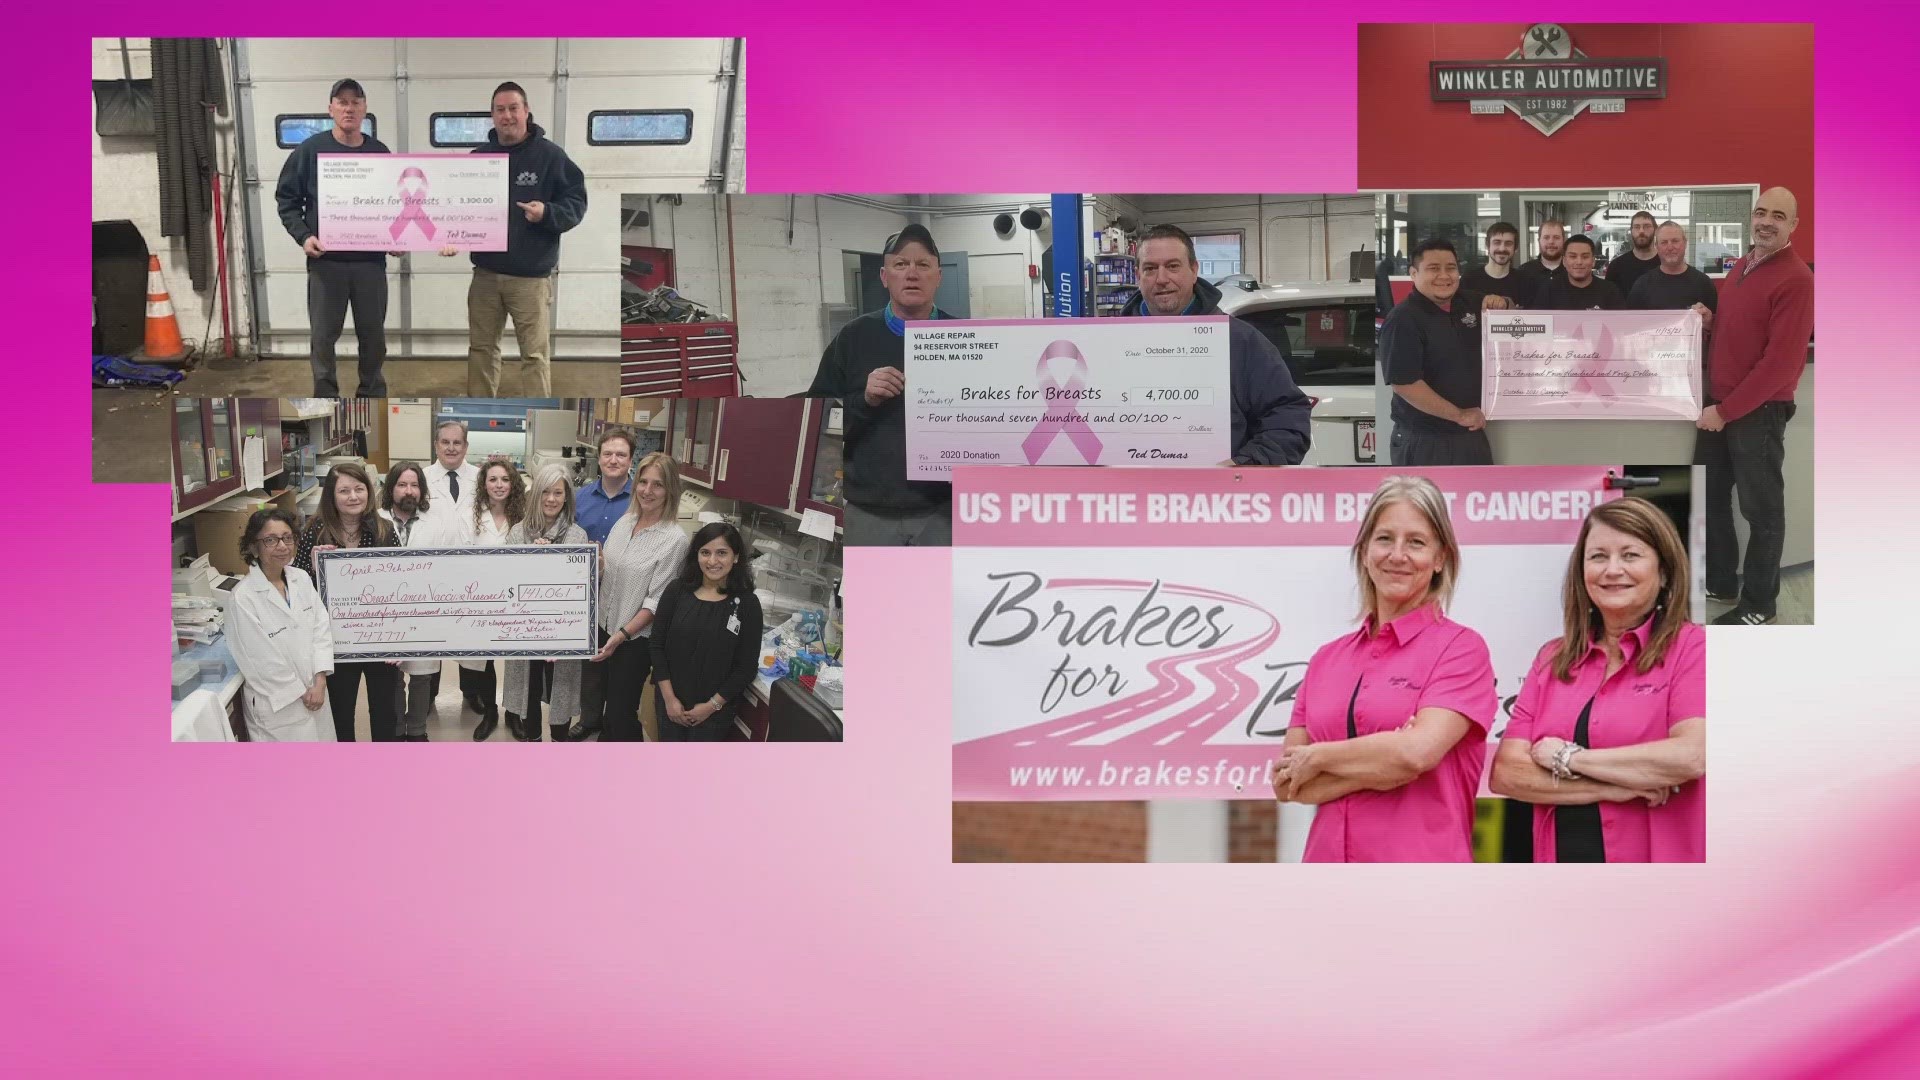 Since 2011, dozens of car repair shops have been installing 'Brakes for Breasts' to raise money for the breast cancer vaccine being researched at Cleveland Clinic.